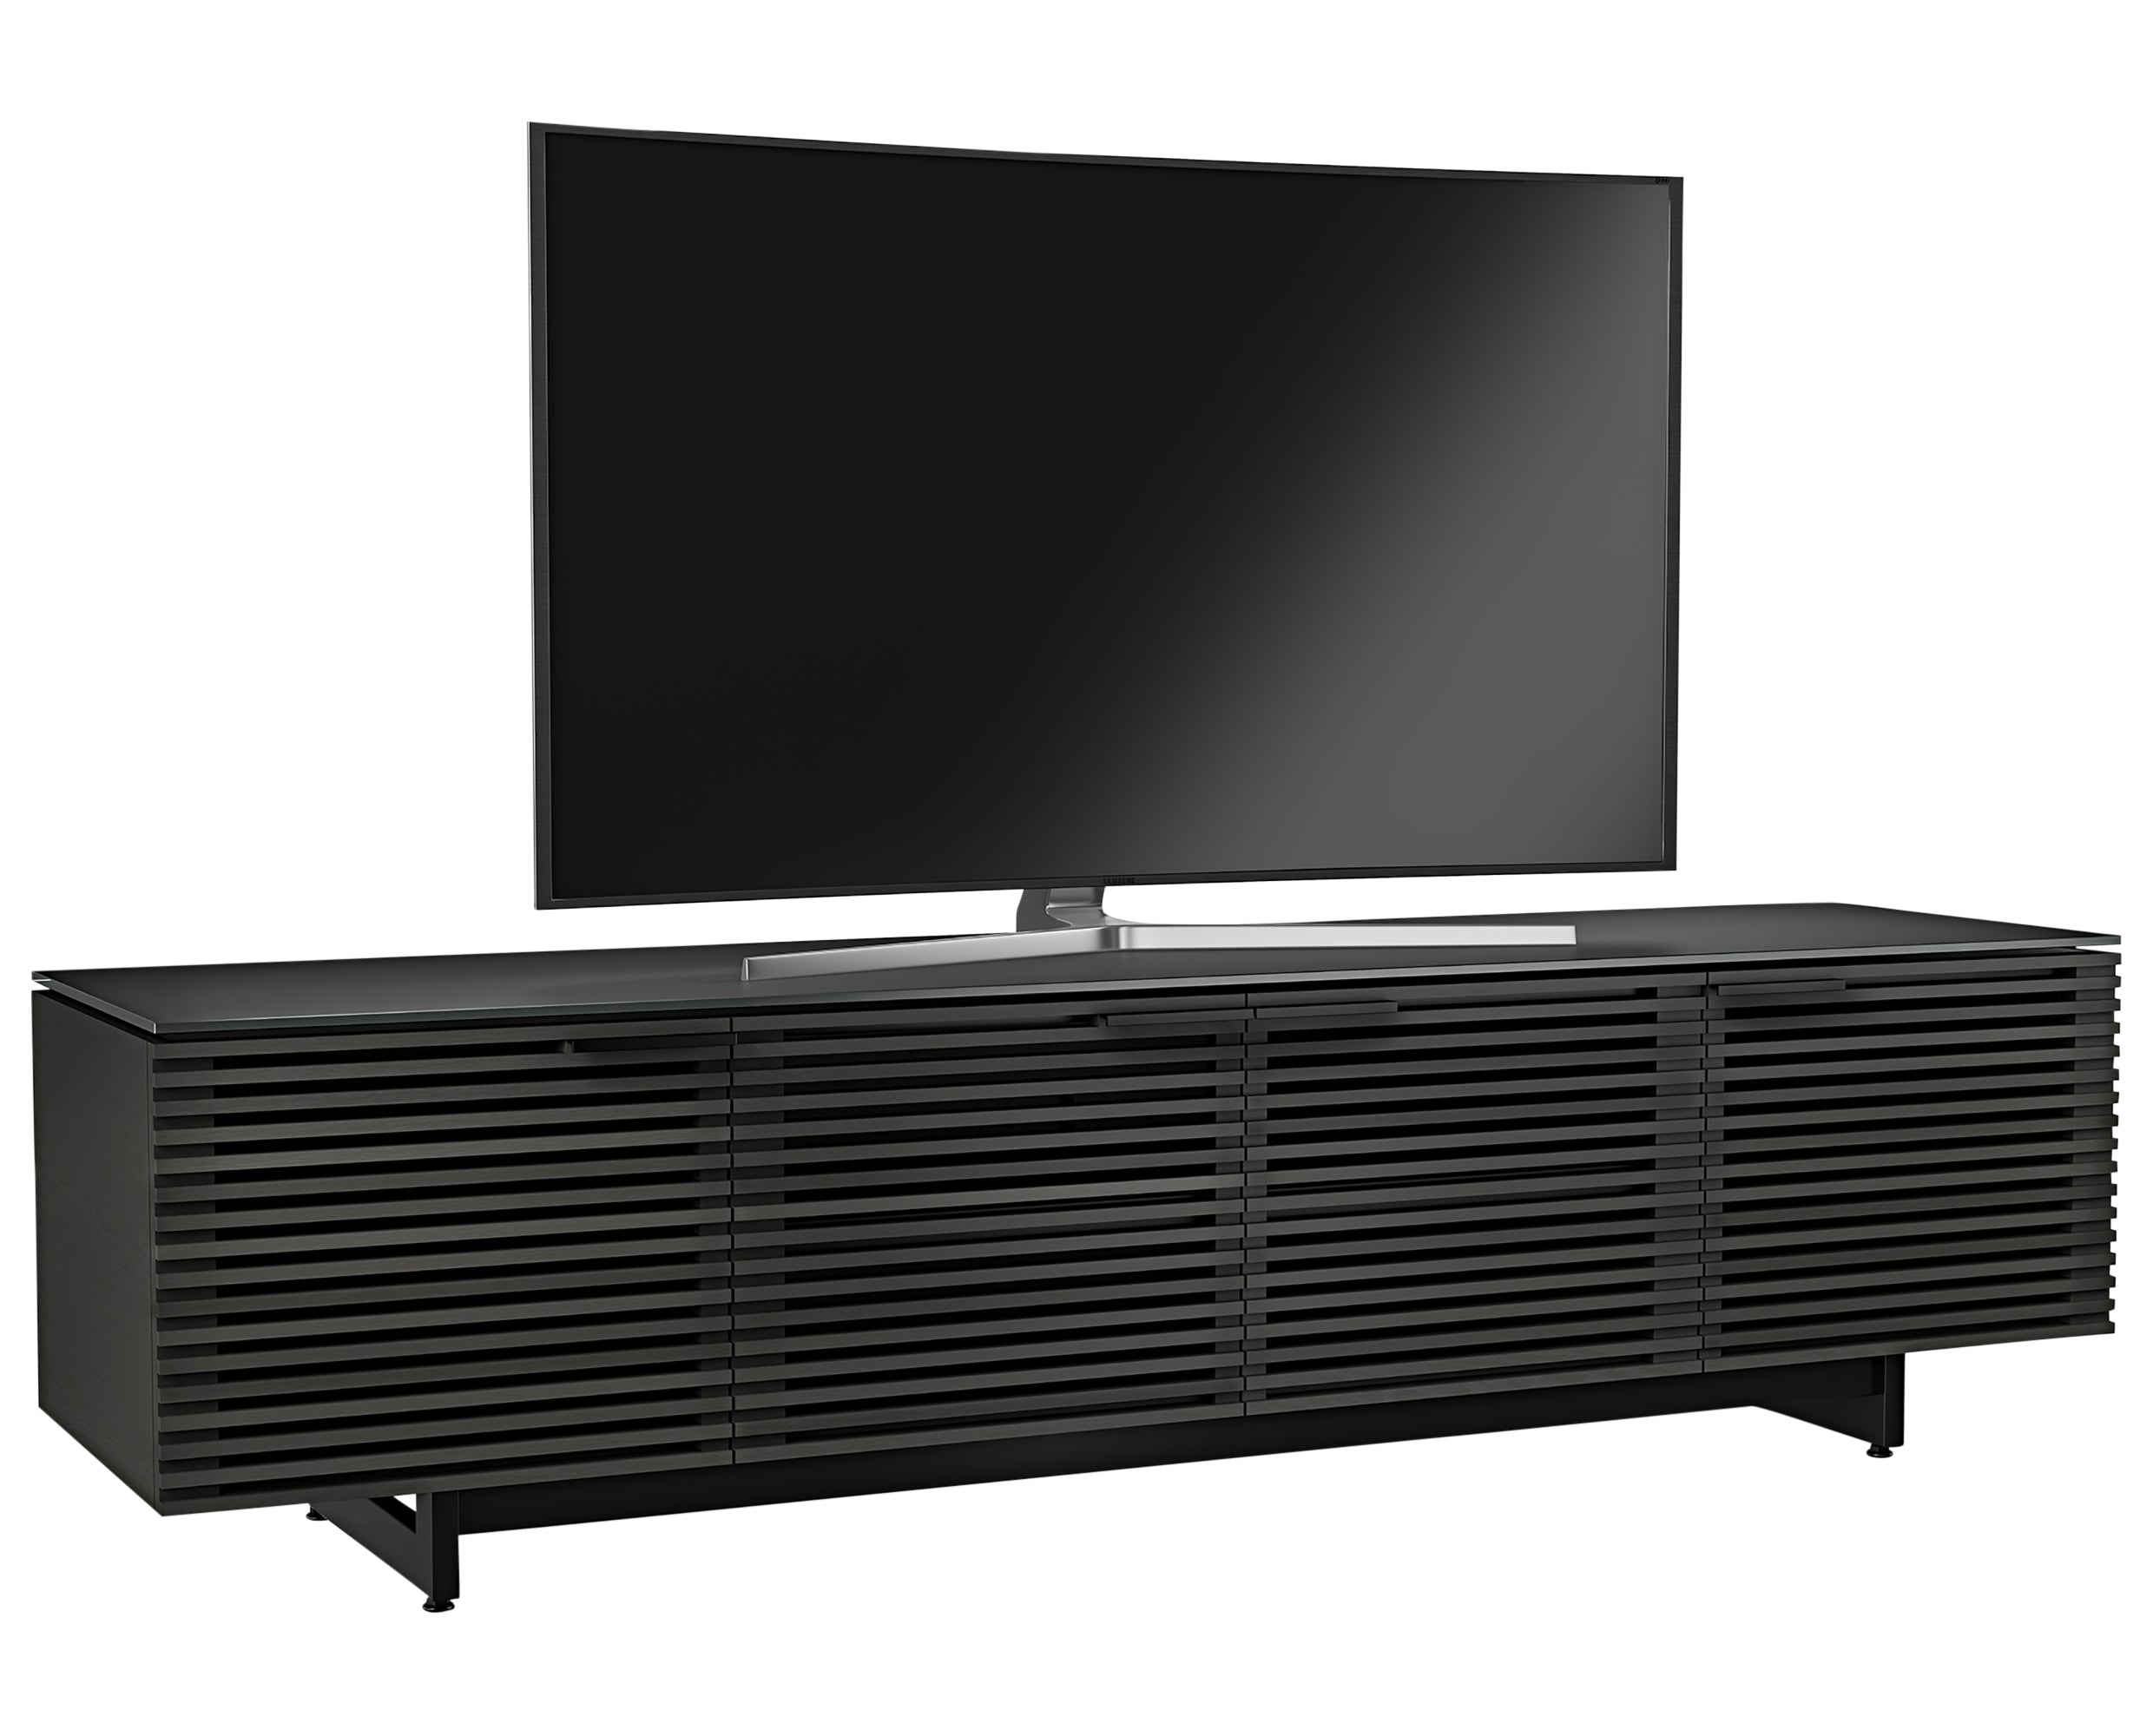 Charcoal Stained Ash & Charcoal Ash Veneer with Black Satin-Etched Glass & Black Steel | BDI Corridor Low Profile TV Stand | Valley Ridge Furniture